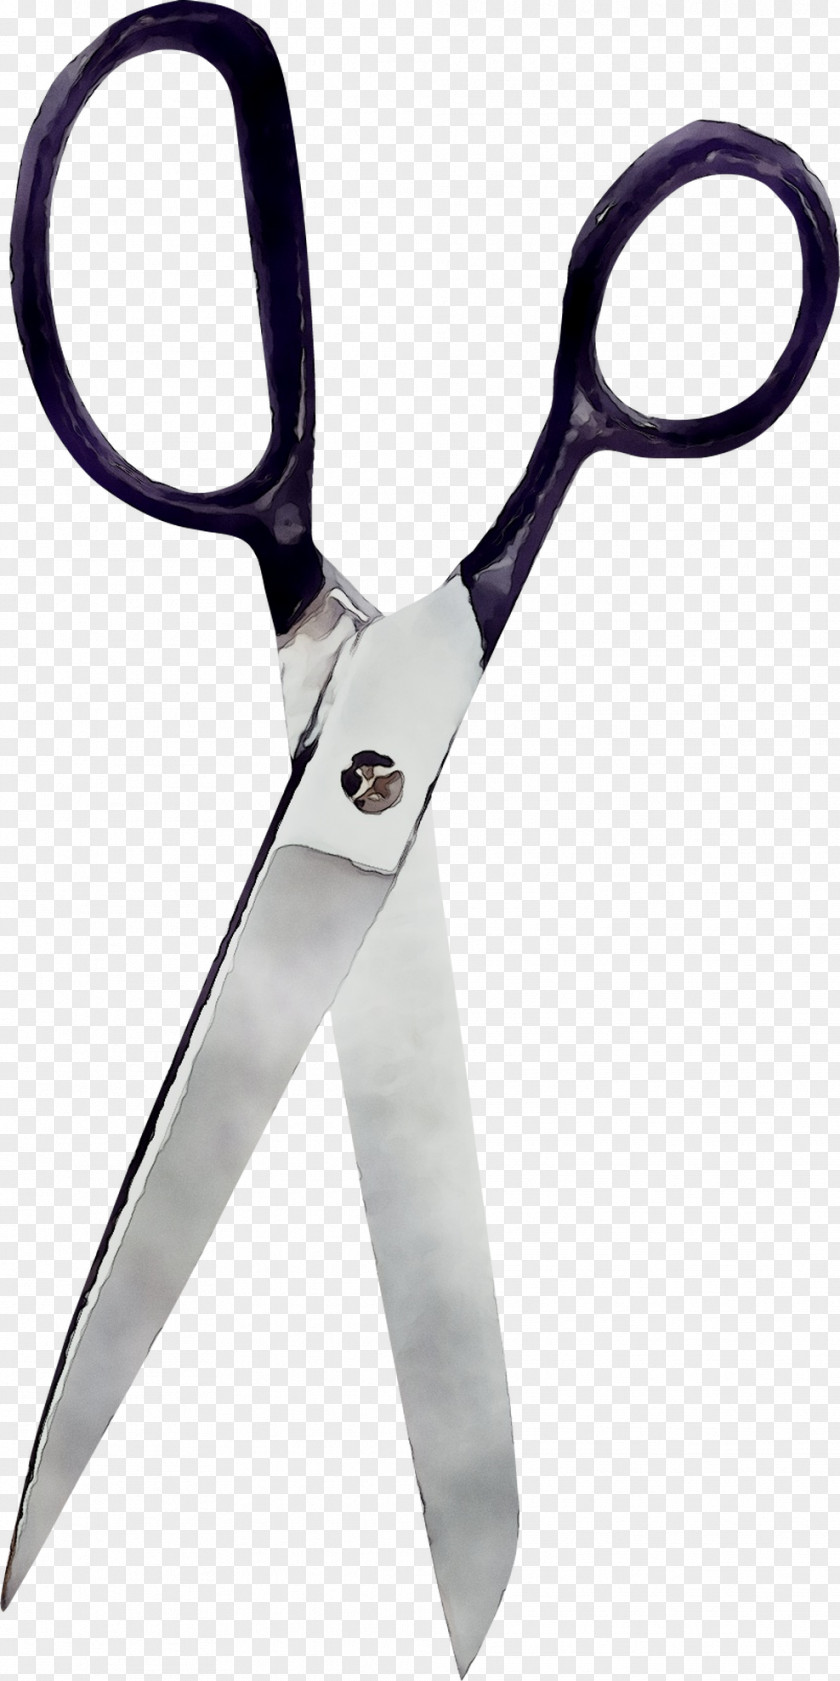 Scissors Product Design Hair Angle PNG